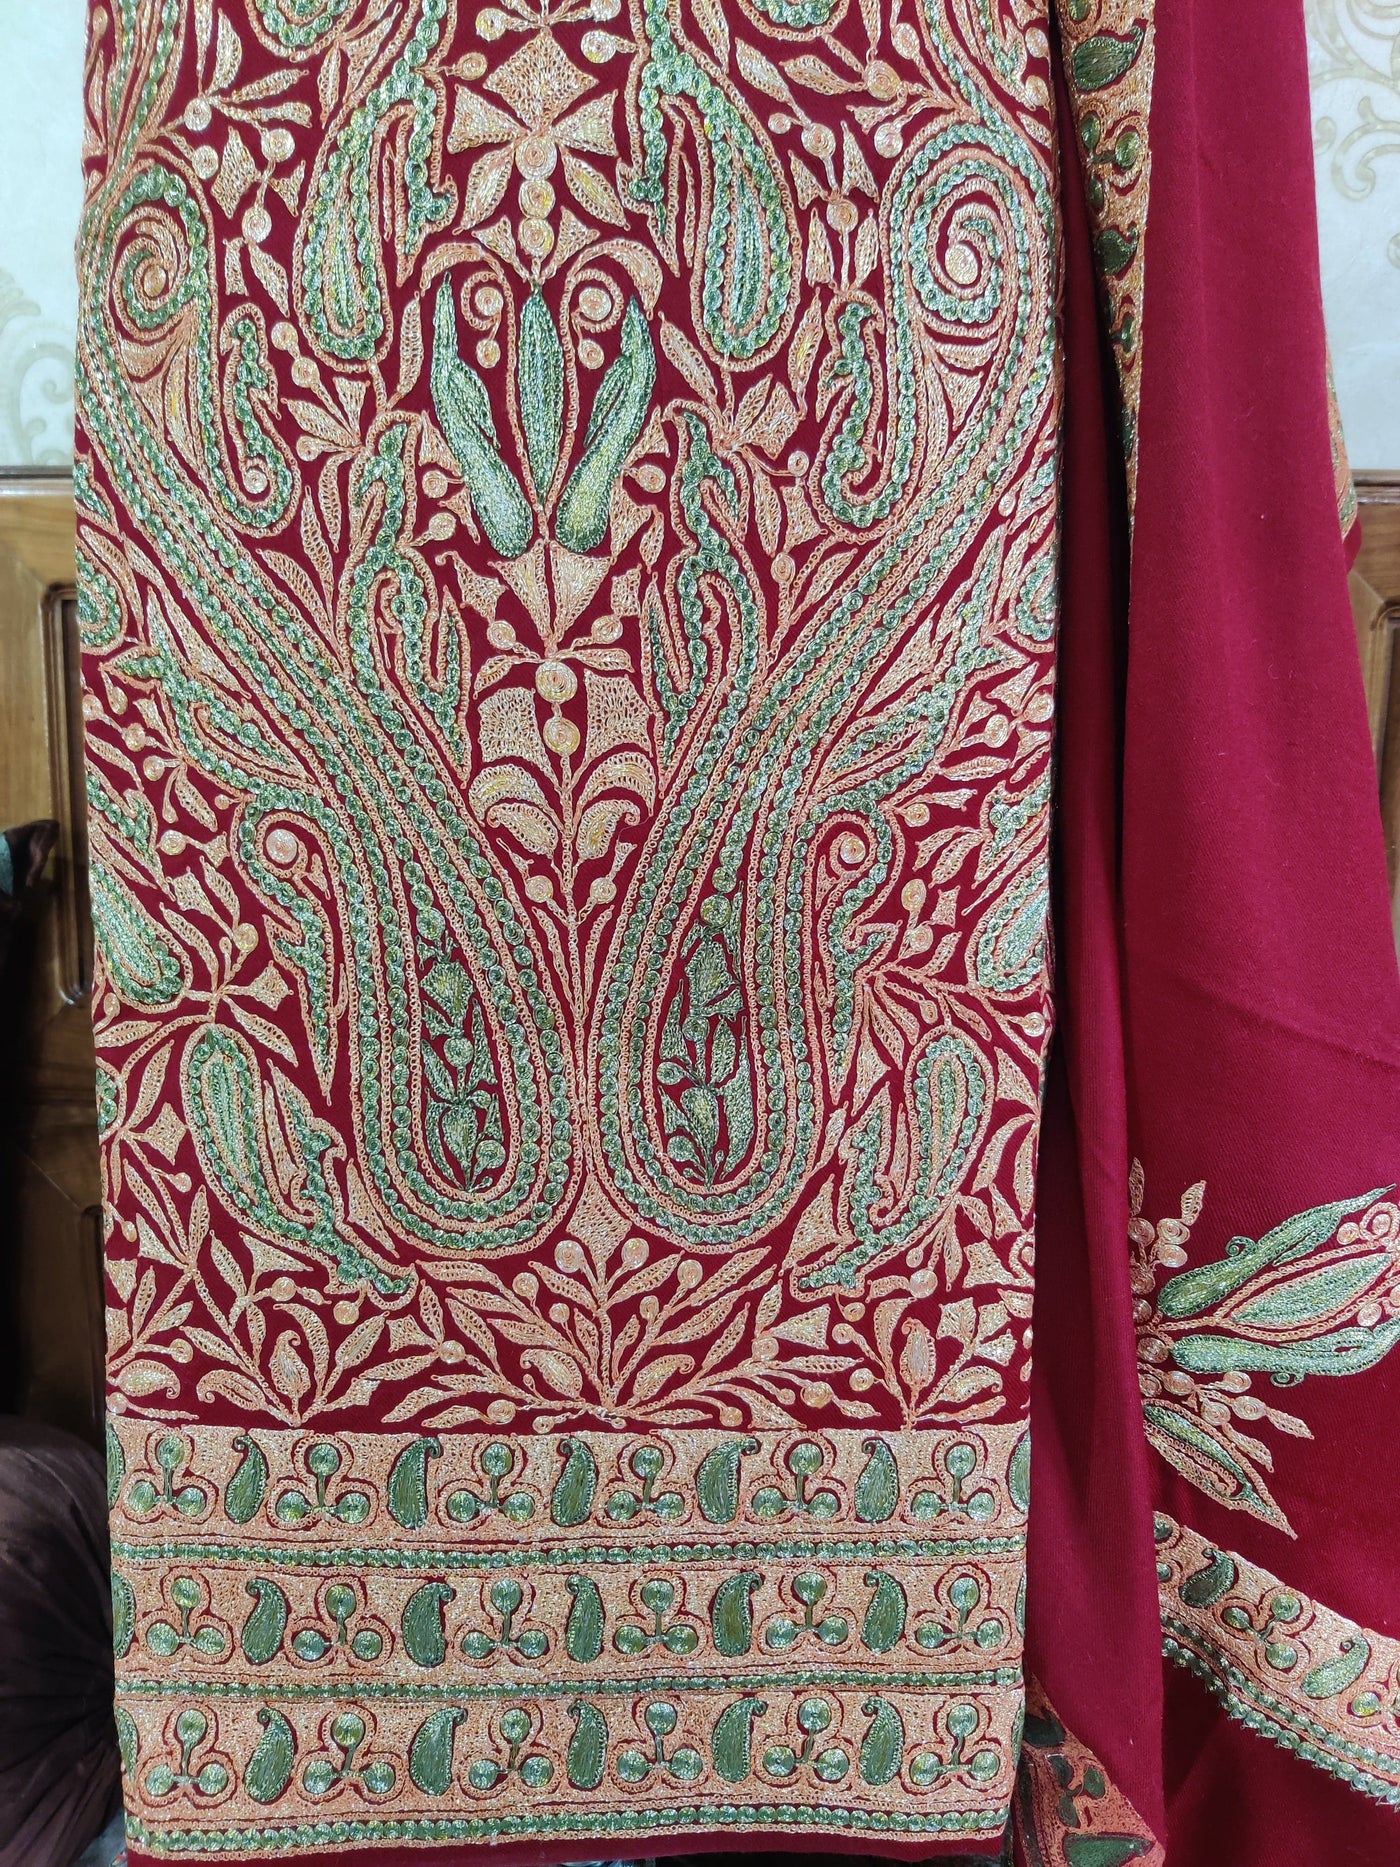 Maroon Kashmiri Woolen Suit with Multi Dual Color Tilla Embroidery All Over Paisley Designs (3 Pcs) Woolen Suit KashmKari Blue Kashmiri Woollen Suit With Tilla Embroidery jaal design (3 pcs).  Kashmiri Suit online